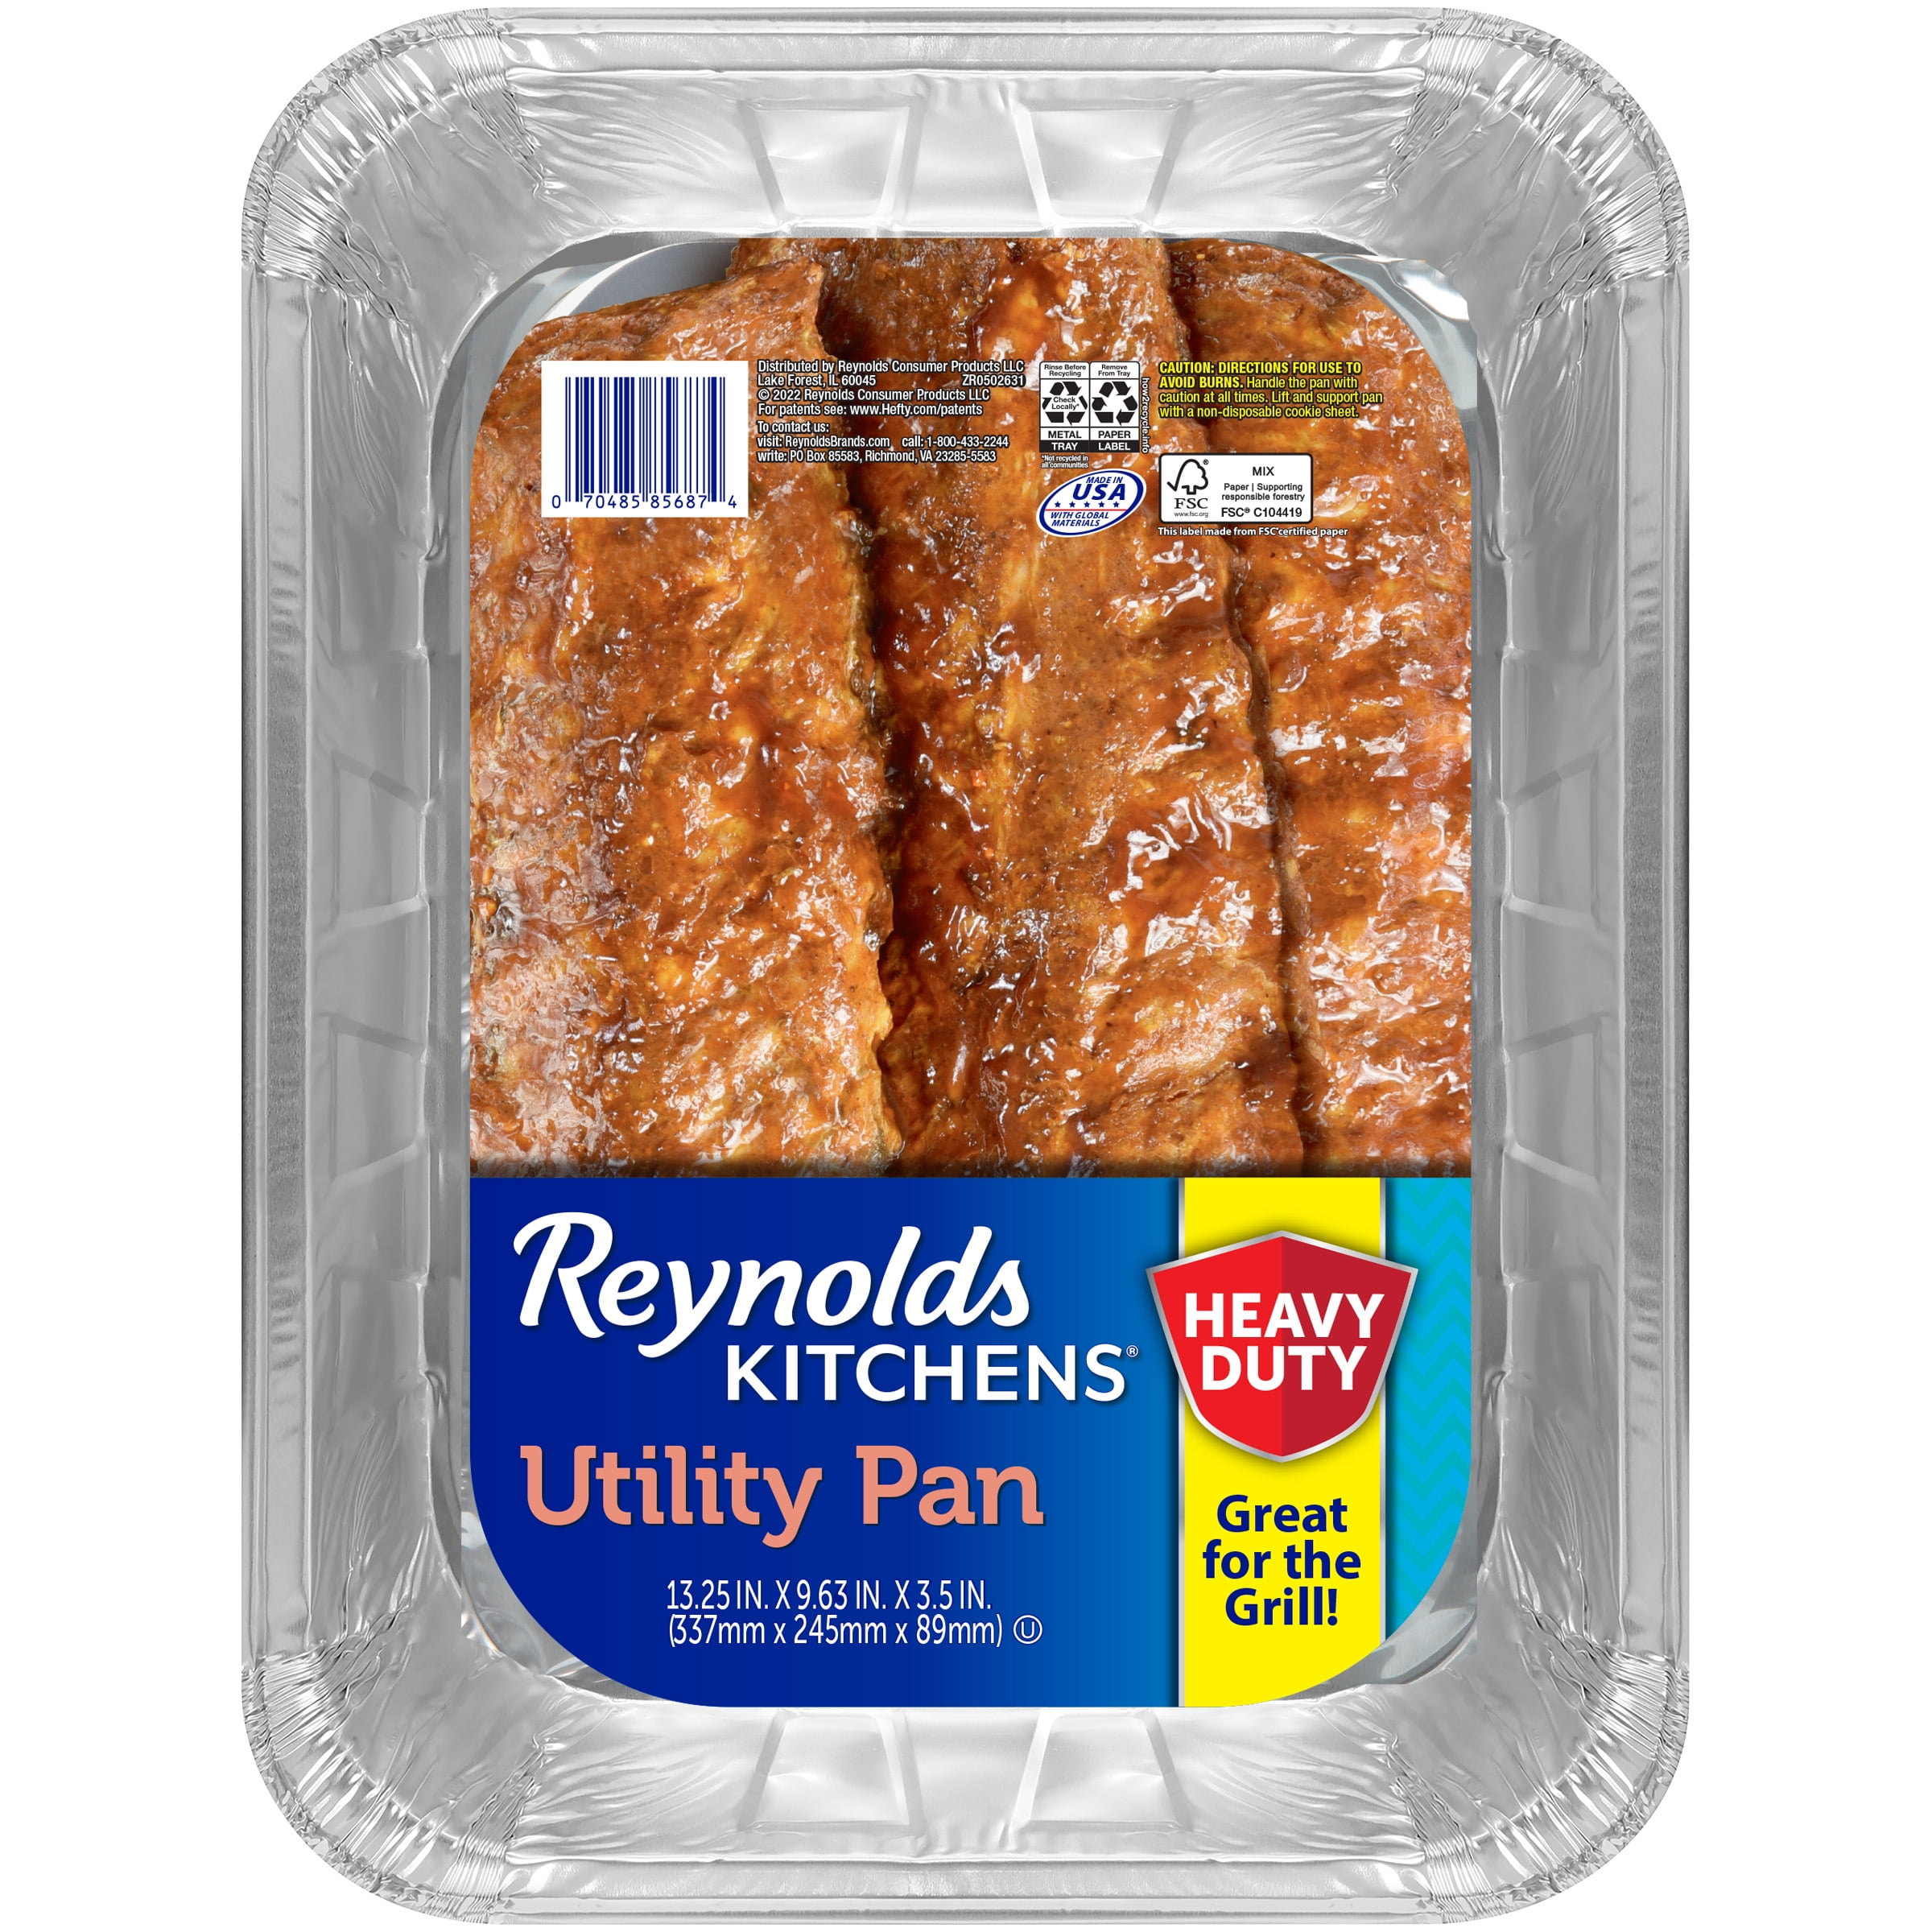 Reynolds Disposable Bakeware Heavy Duty Giant Size 1 pan 1 ct